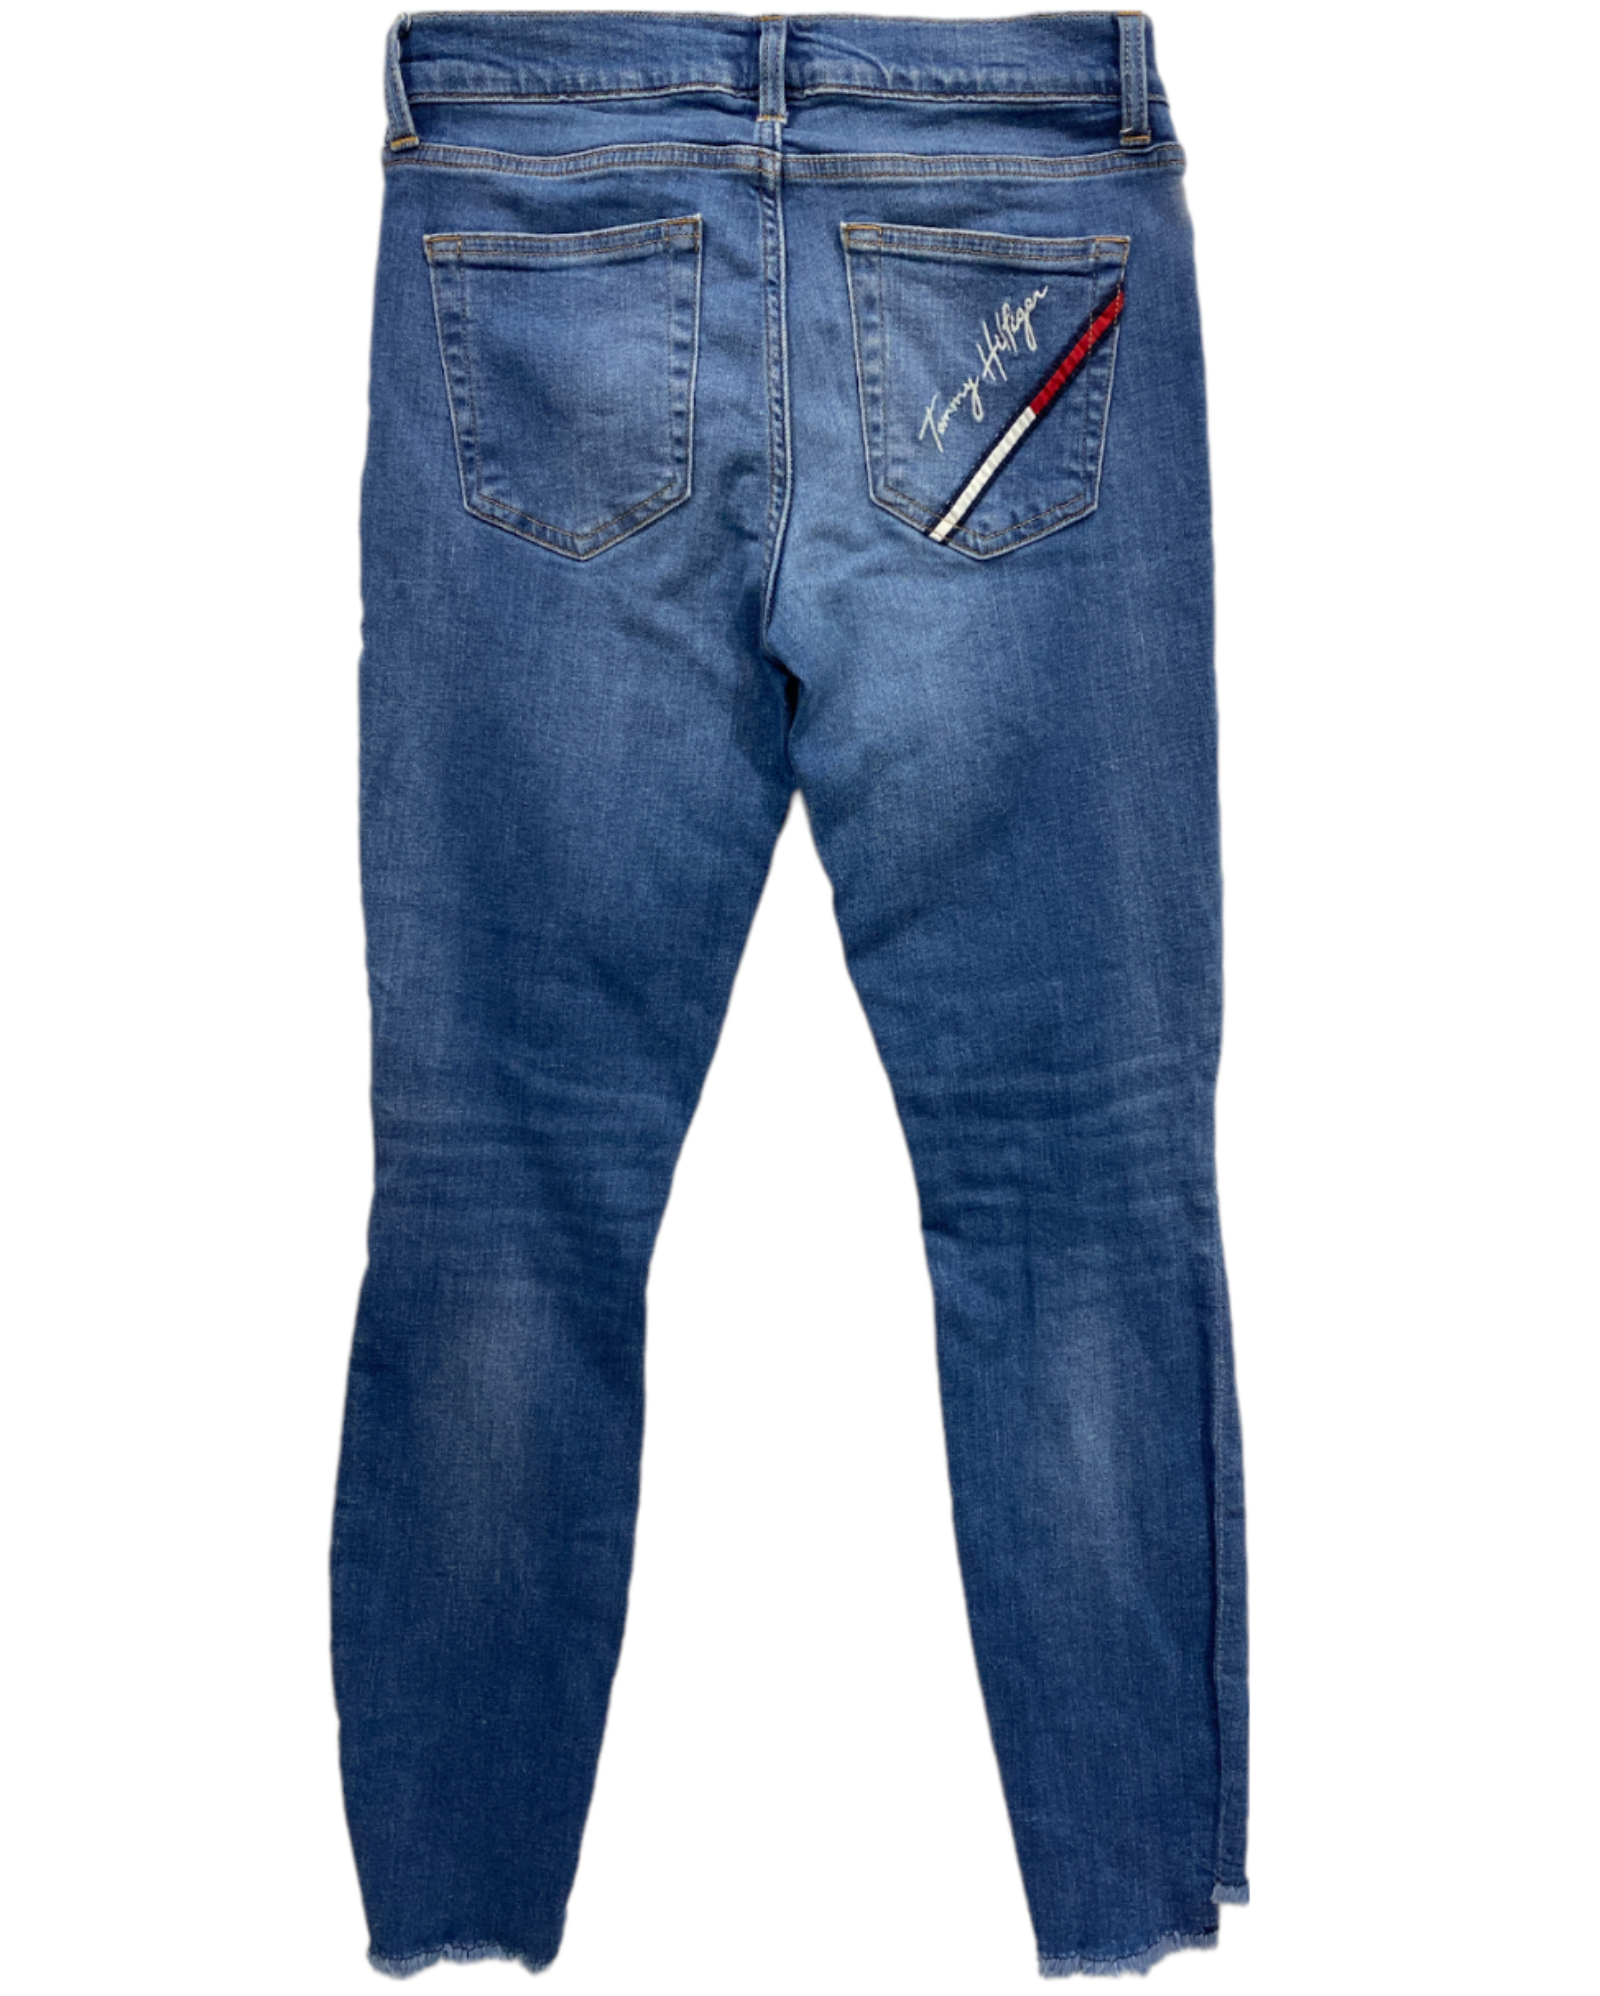 Jeans Rectos Tommy Hilfiger 2